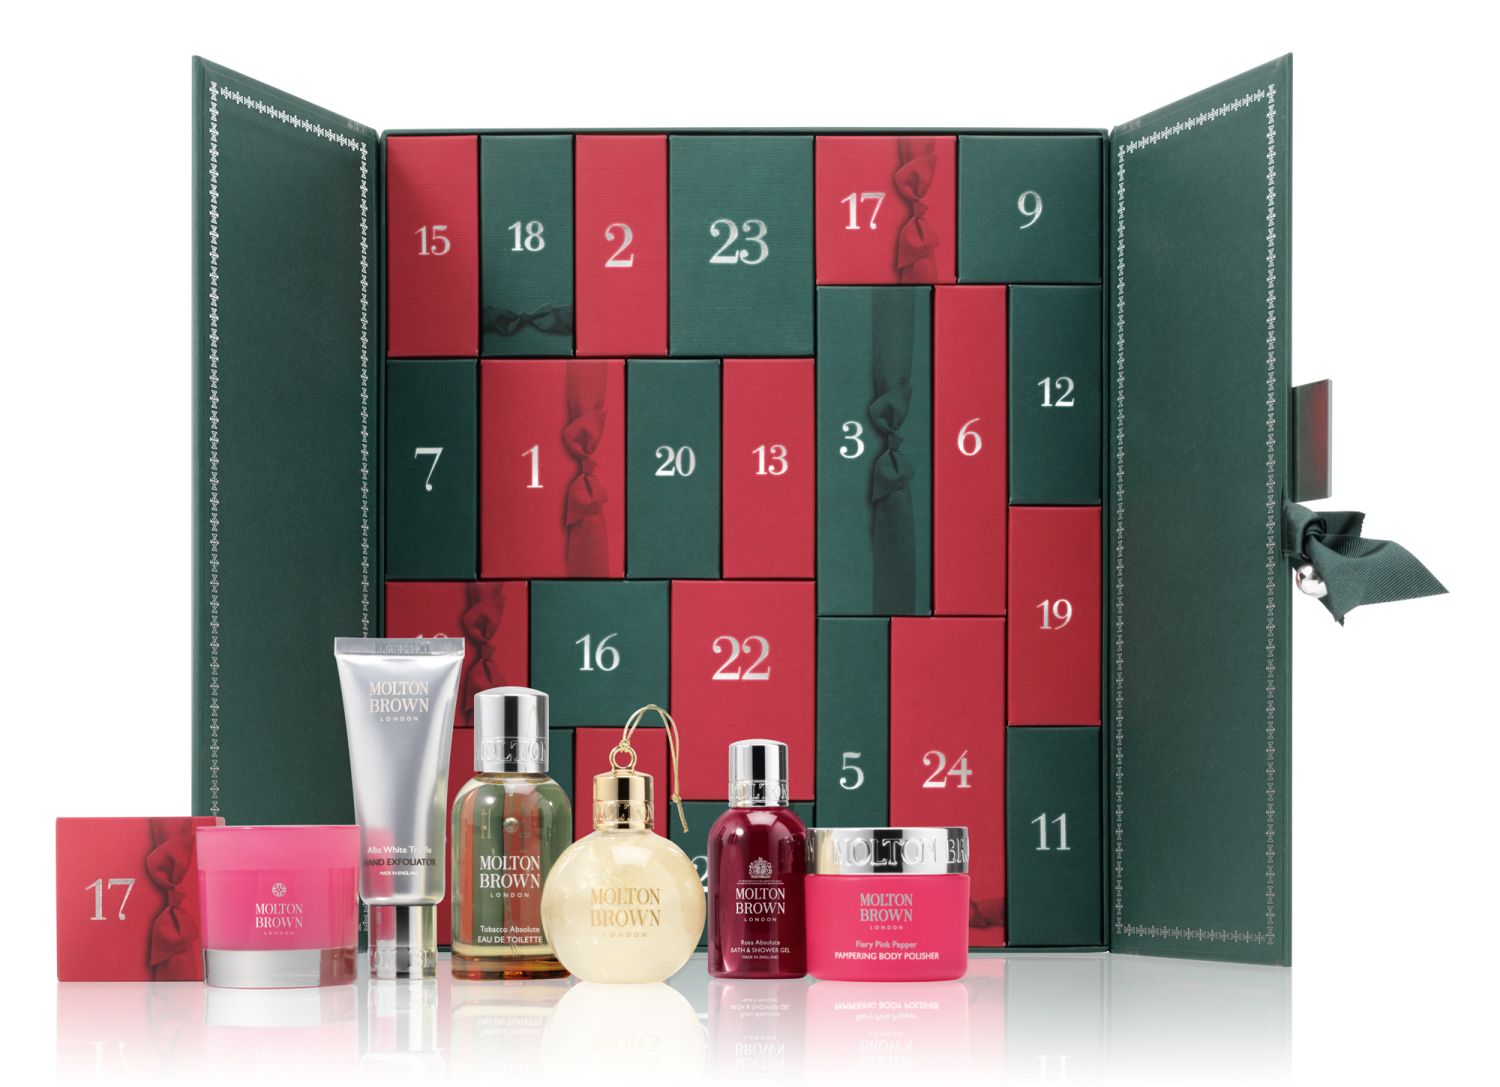 Advent calendars 2017 15 of the most extravagant ones money can buy